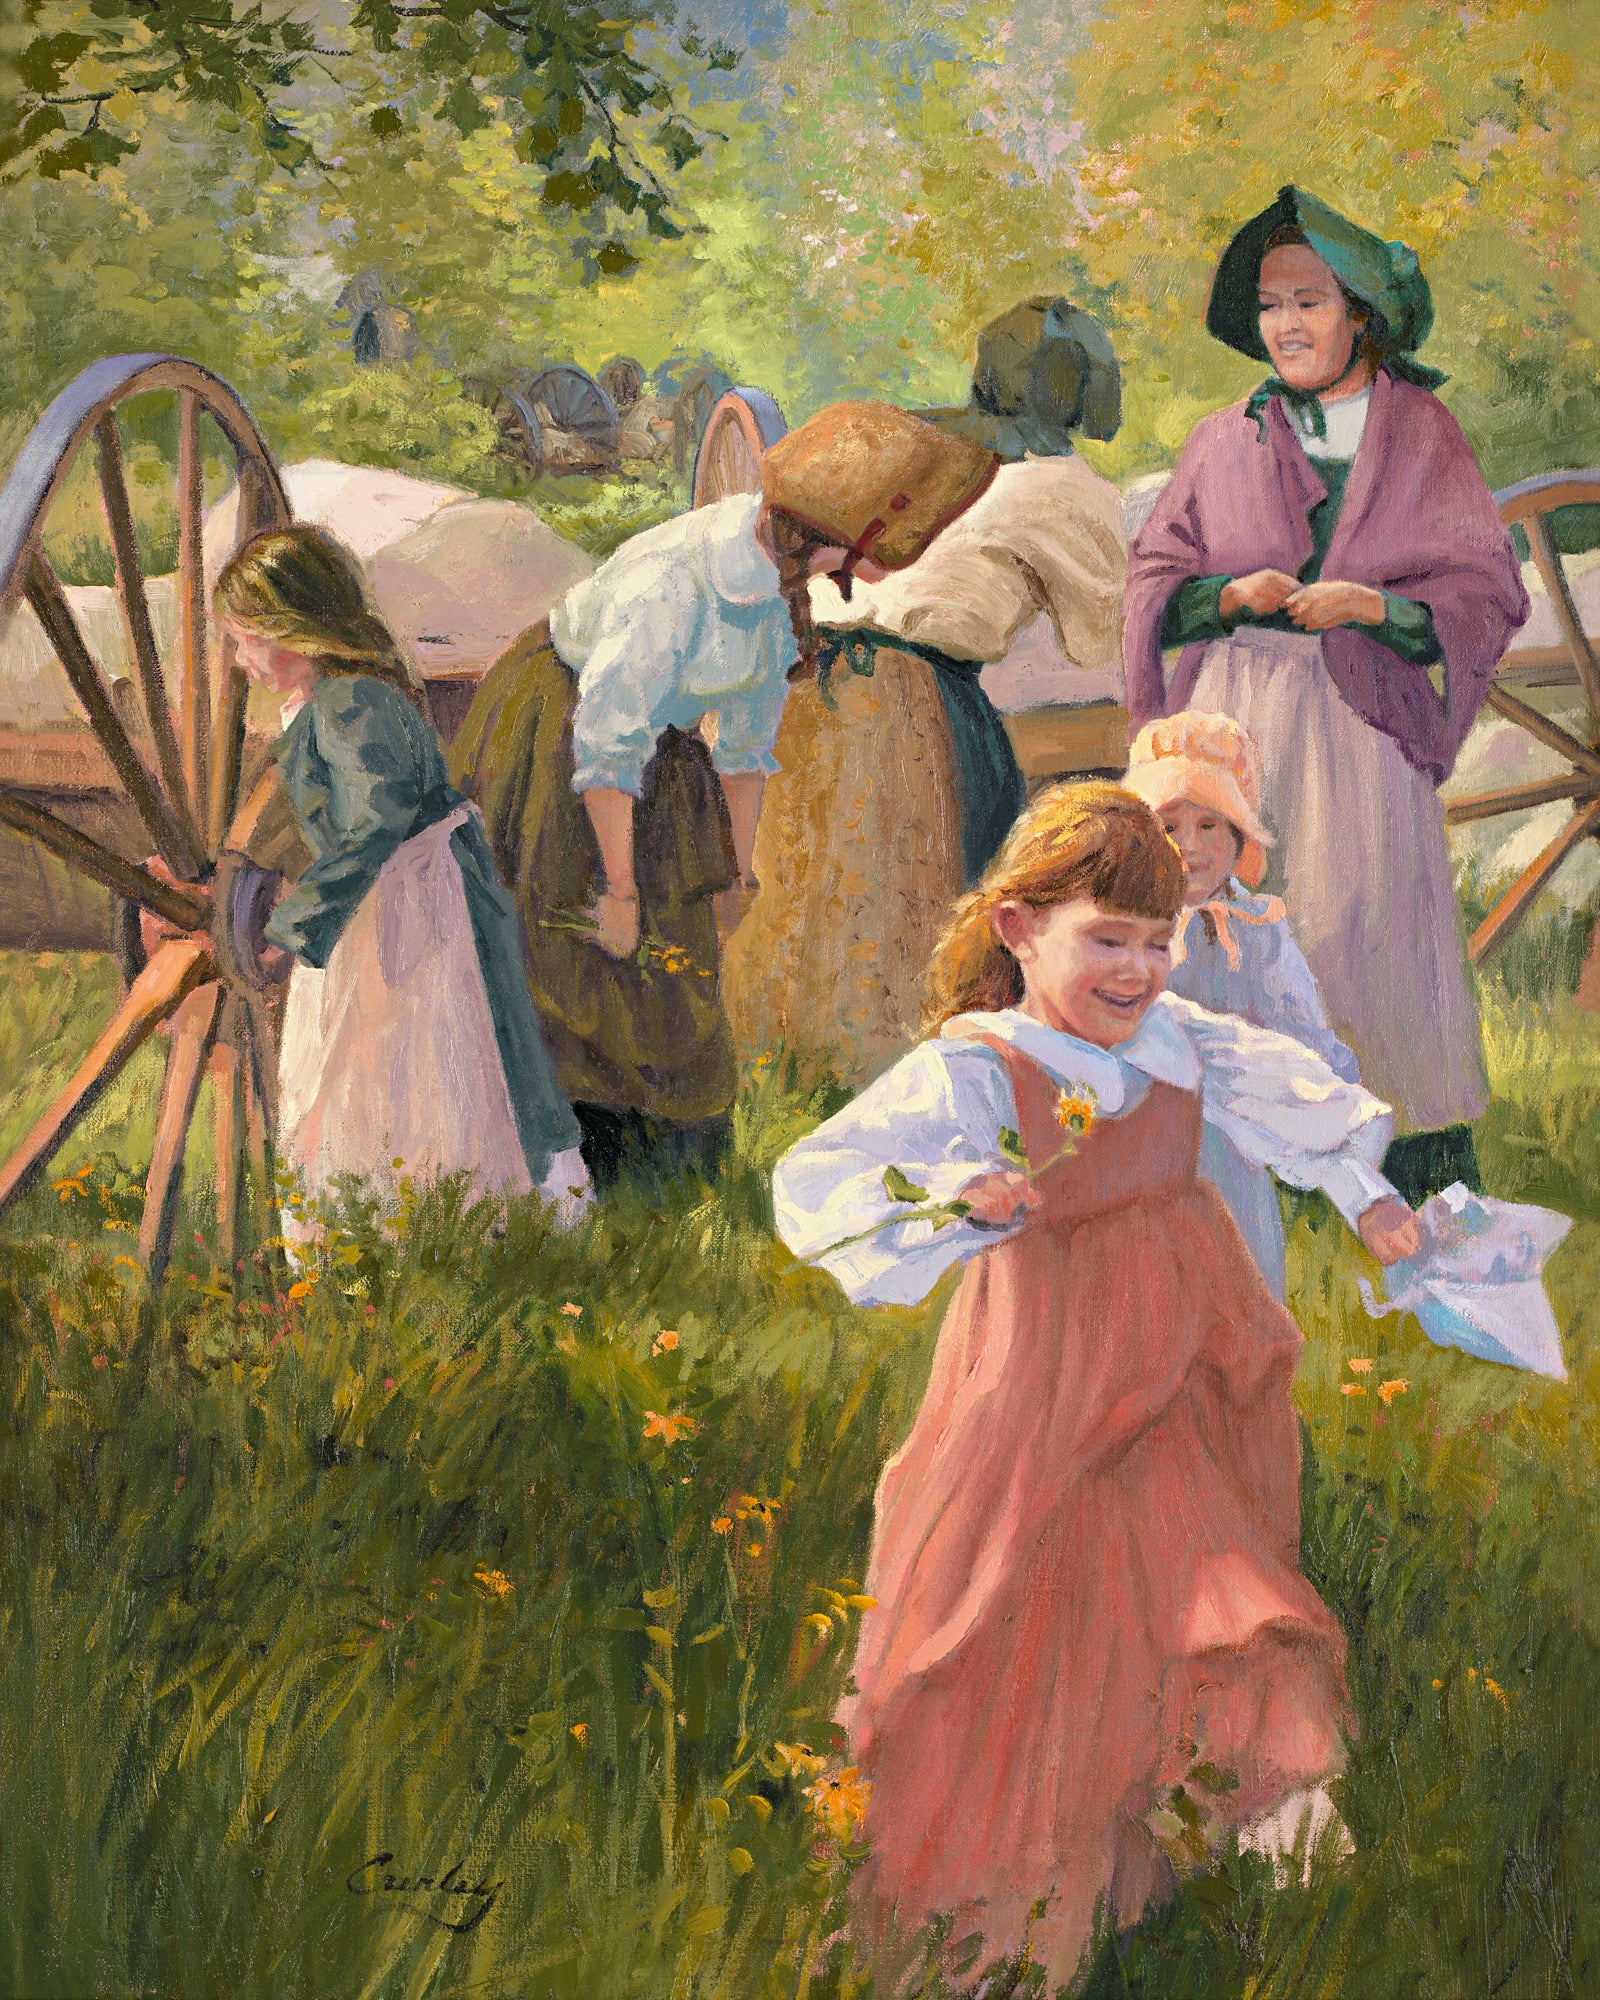 Group of women with handcarts smile while young girl picks flower. 